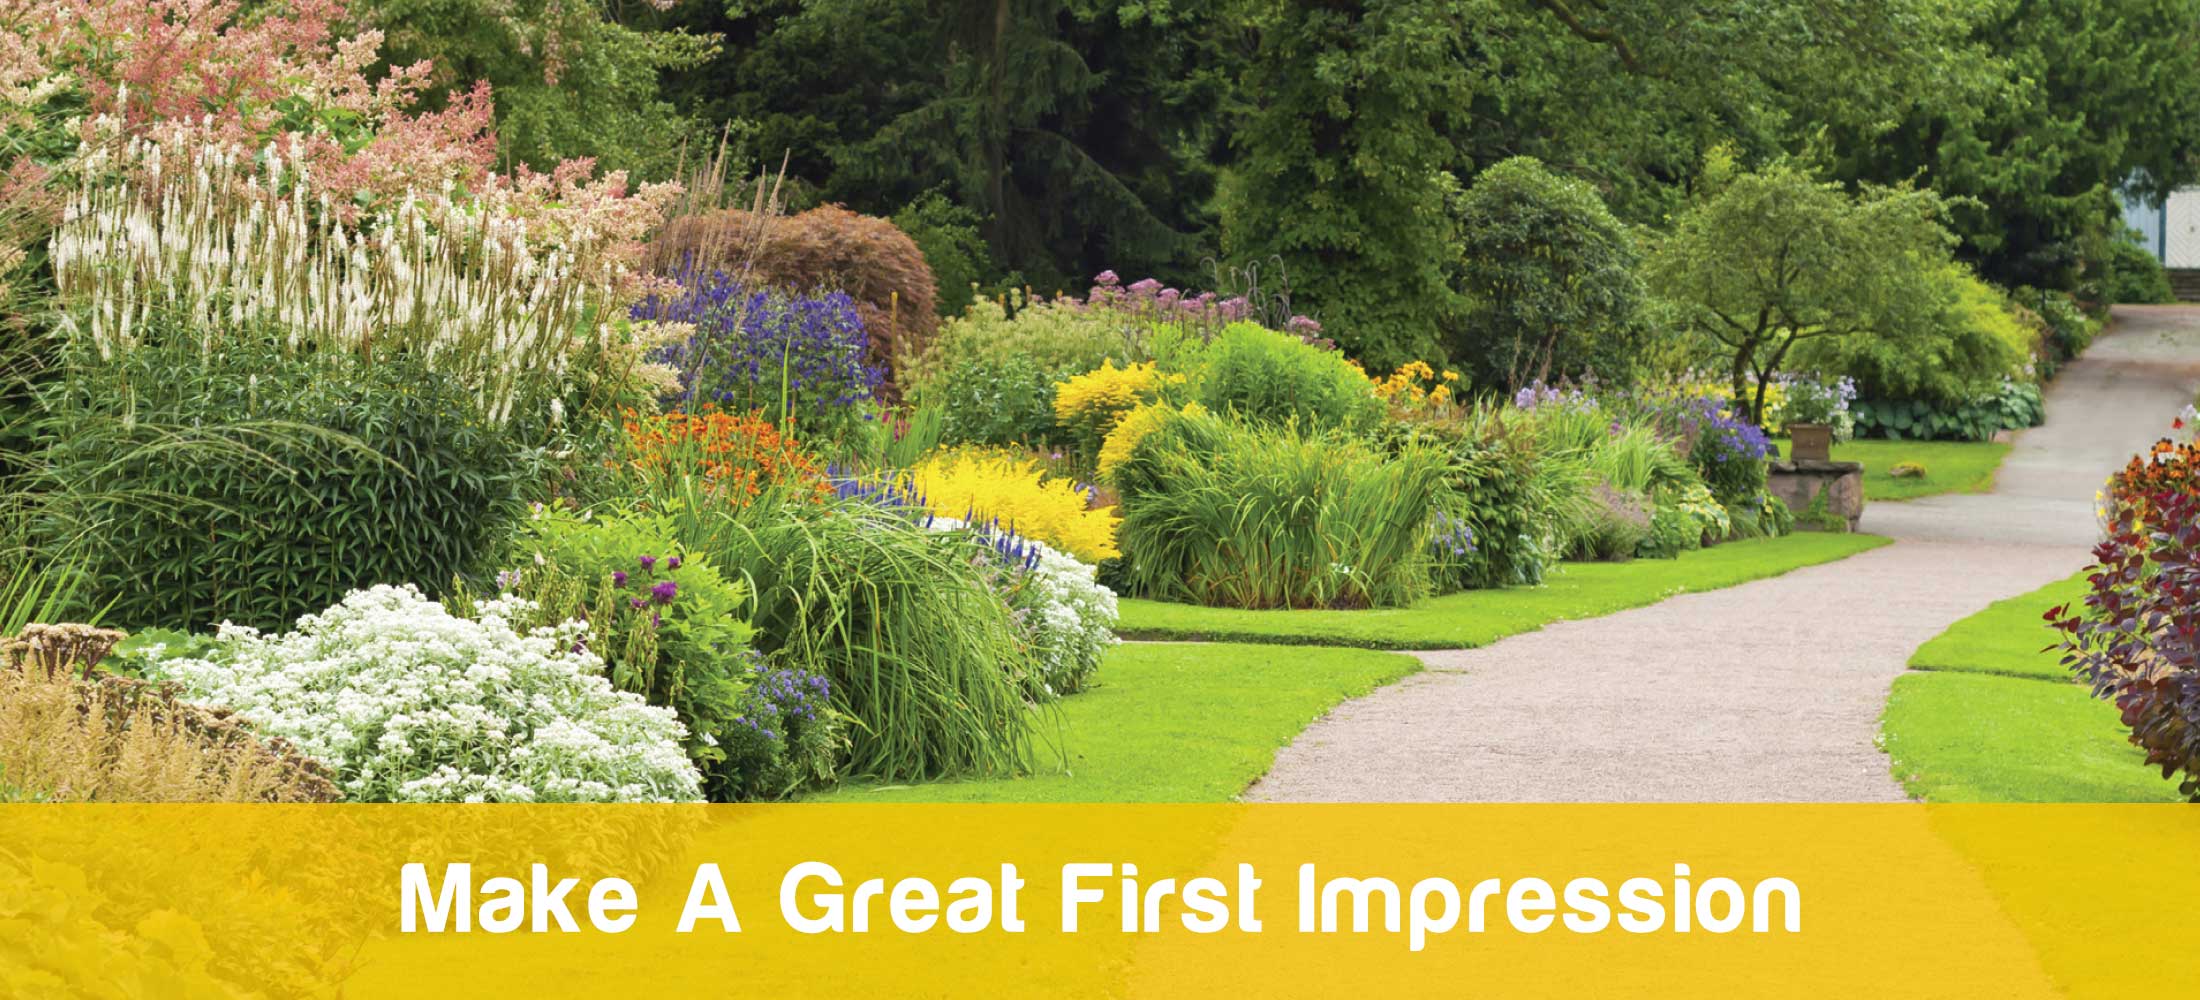 Landscape Design Company Brothers, Landscapers In Ma